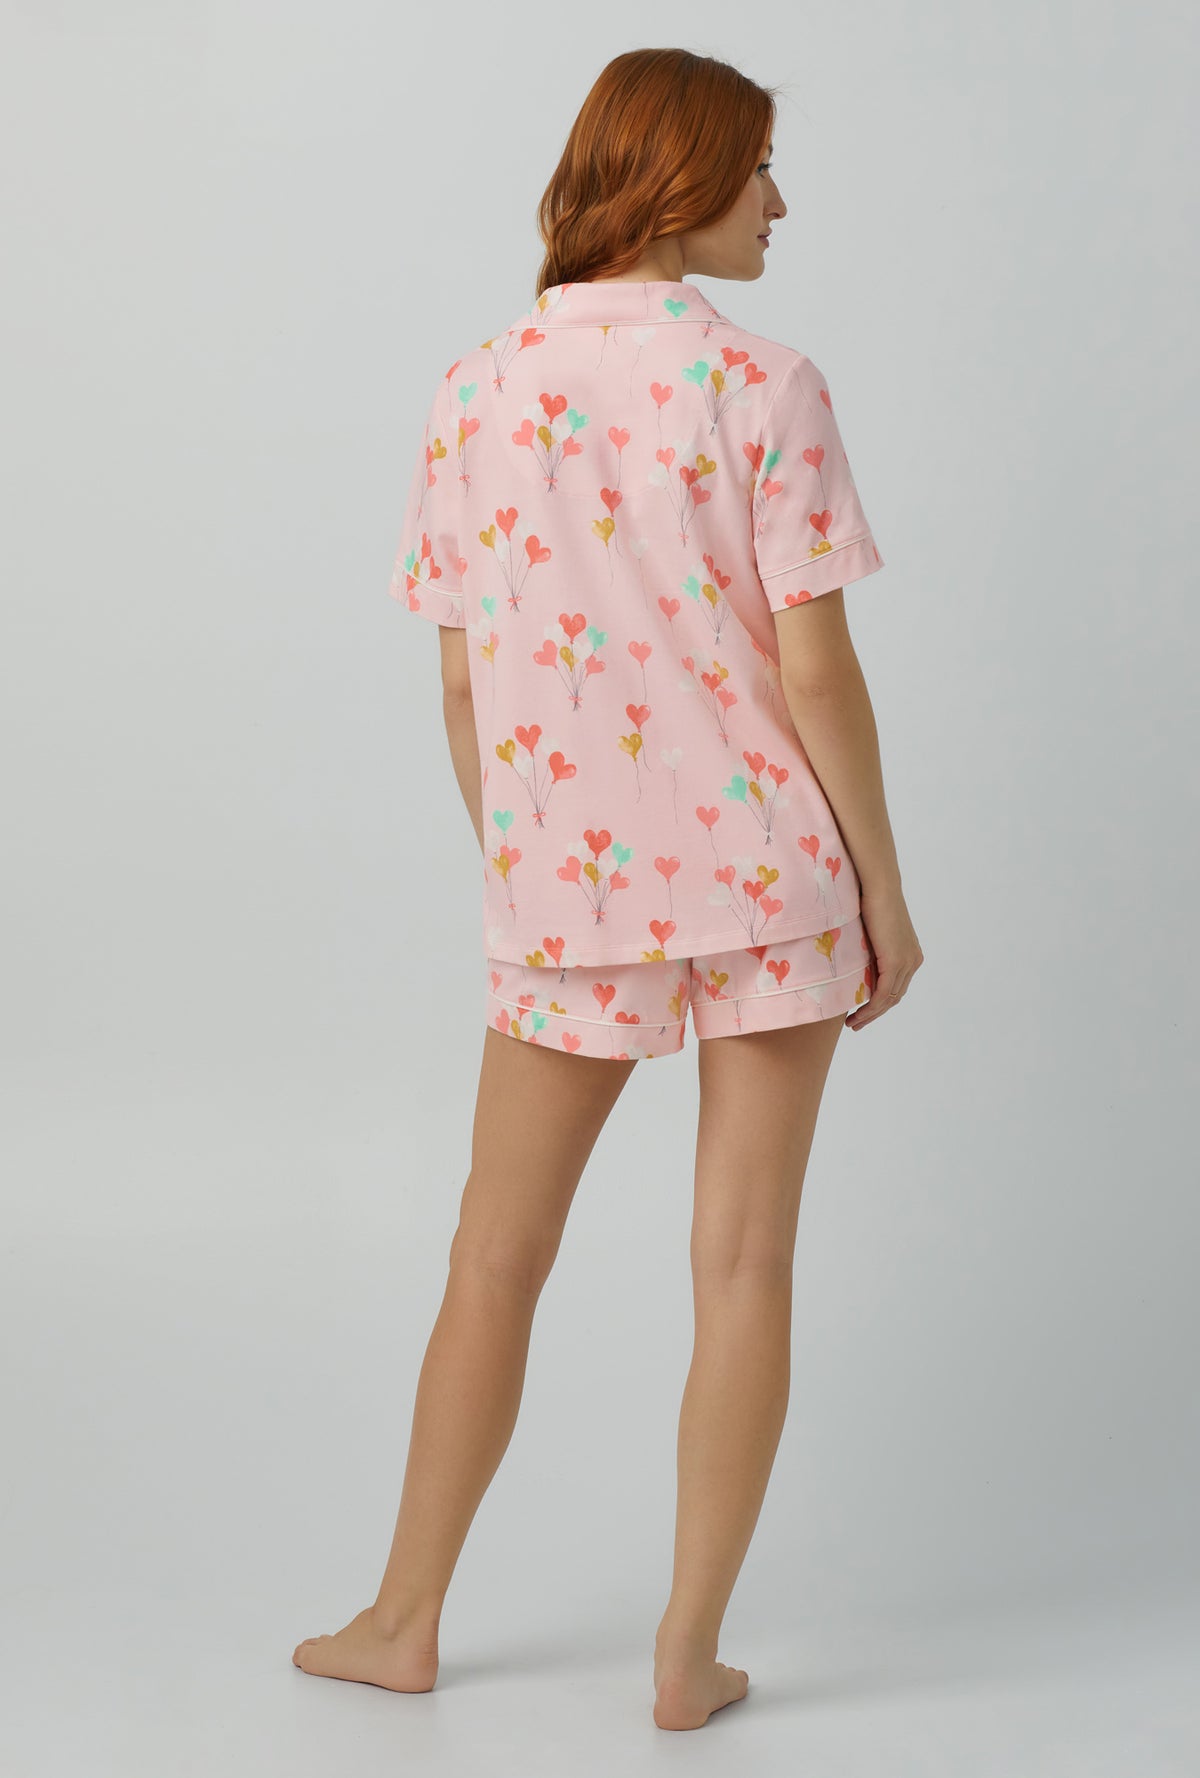 A lady wearing Short Sleeve Classic Shorty Stretch Jersey PJ Set with Floating Hearts